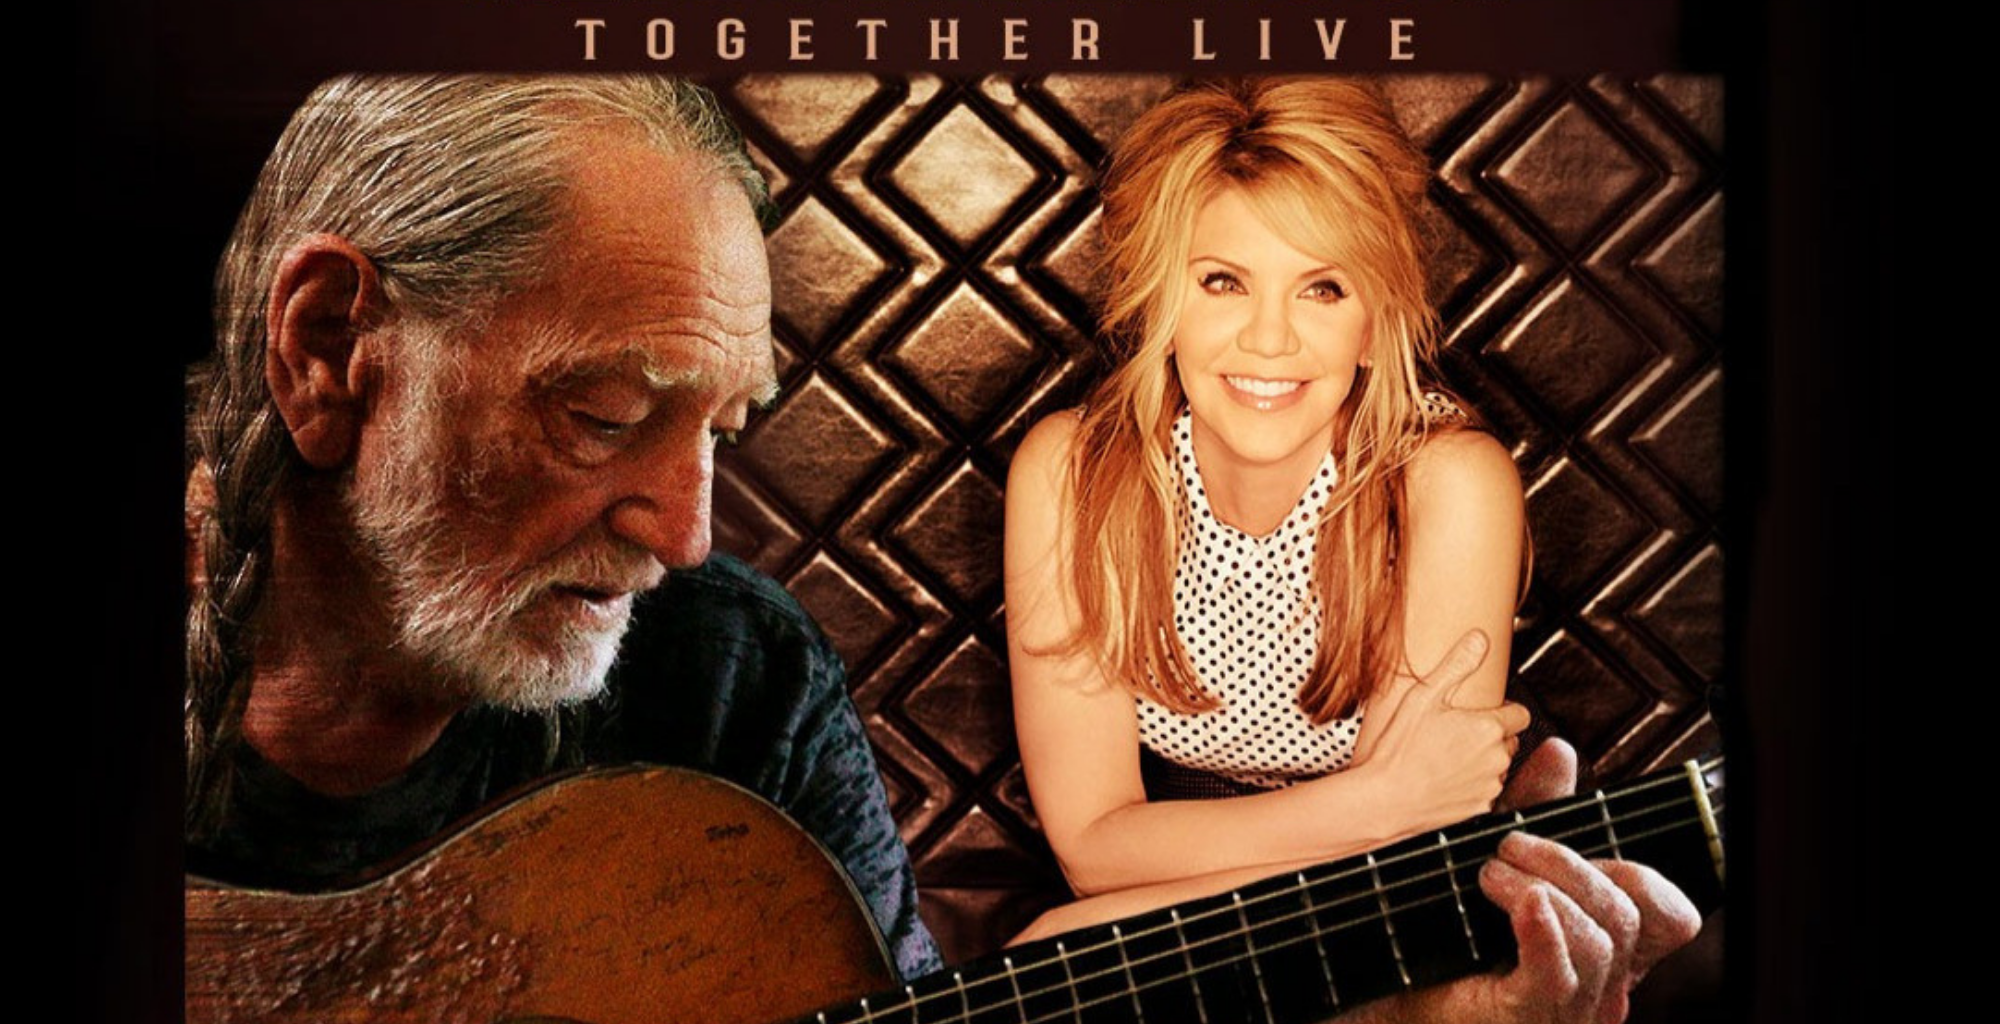 Willie Nelson And Alison Krauss Together Again.